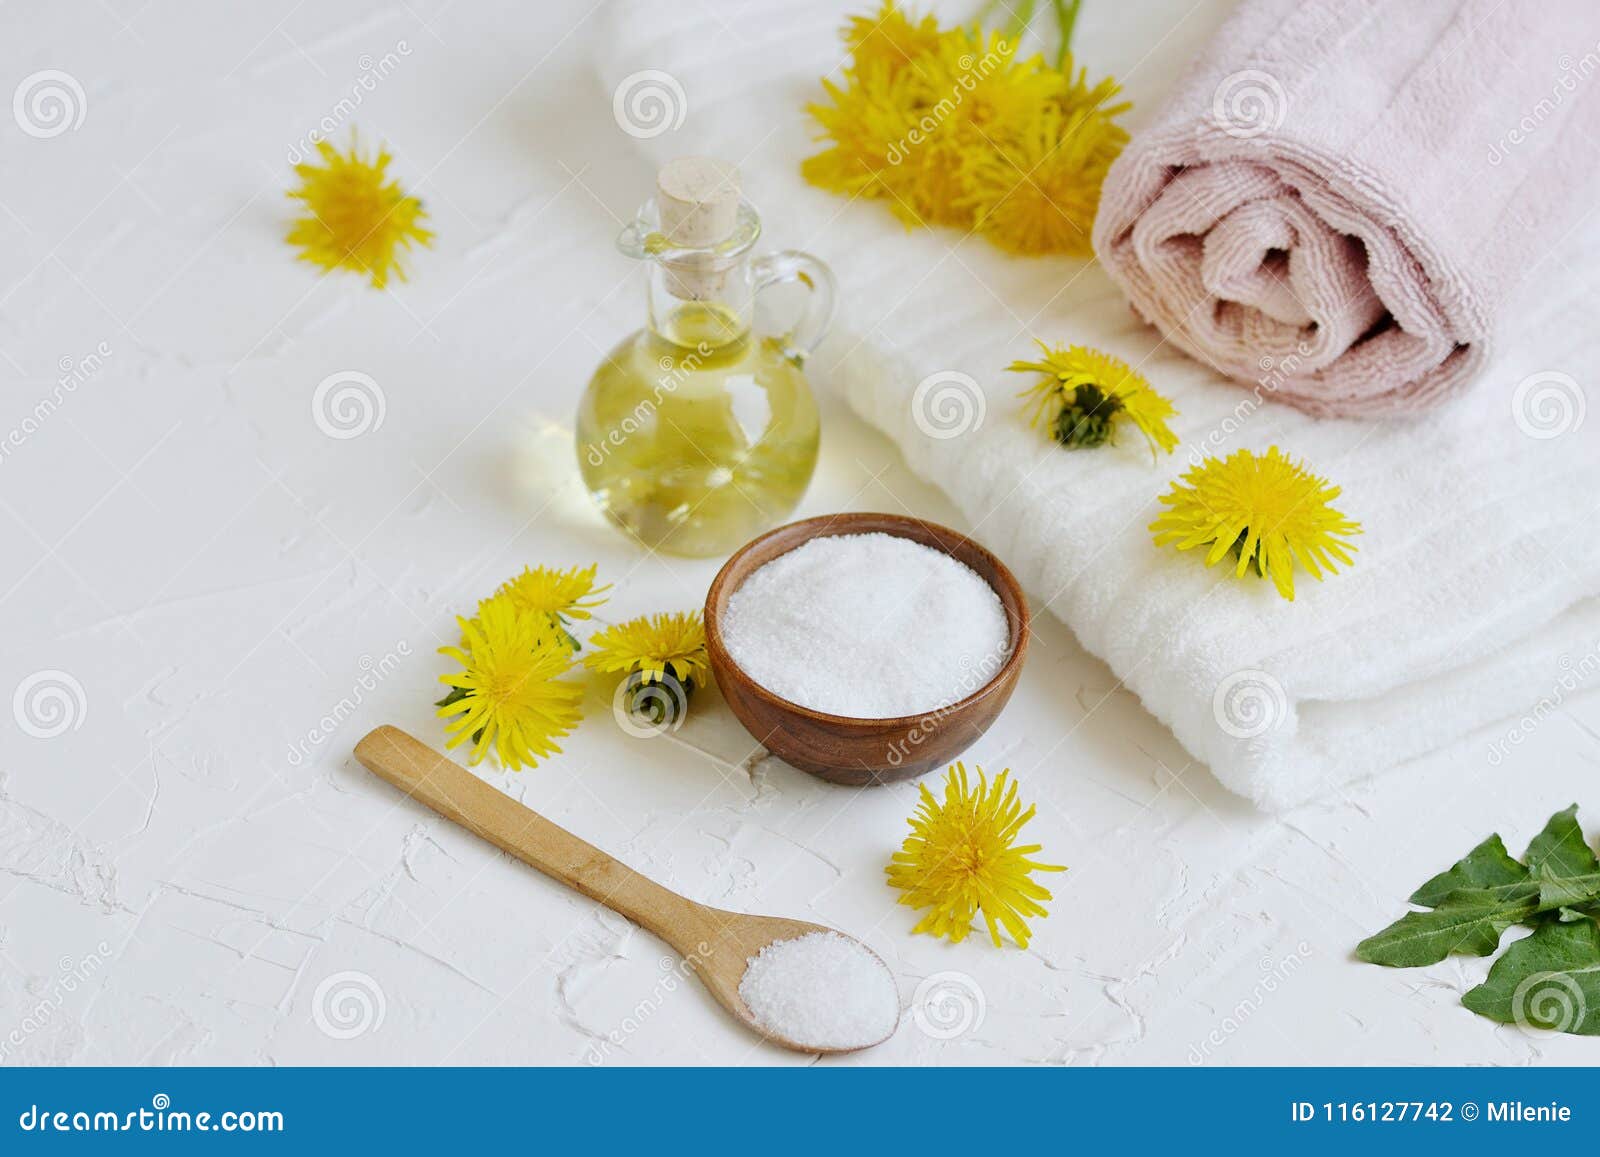 Natural Ingredients for Homemade Body Salt Scrub with Dandelion Flowers,  Lemon, Honey and Olive Oil Stock Photo - Image of butter, hair: 116127742